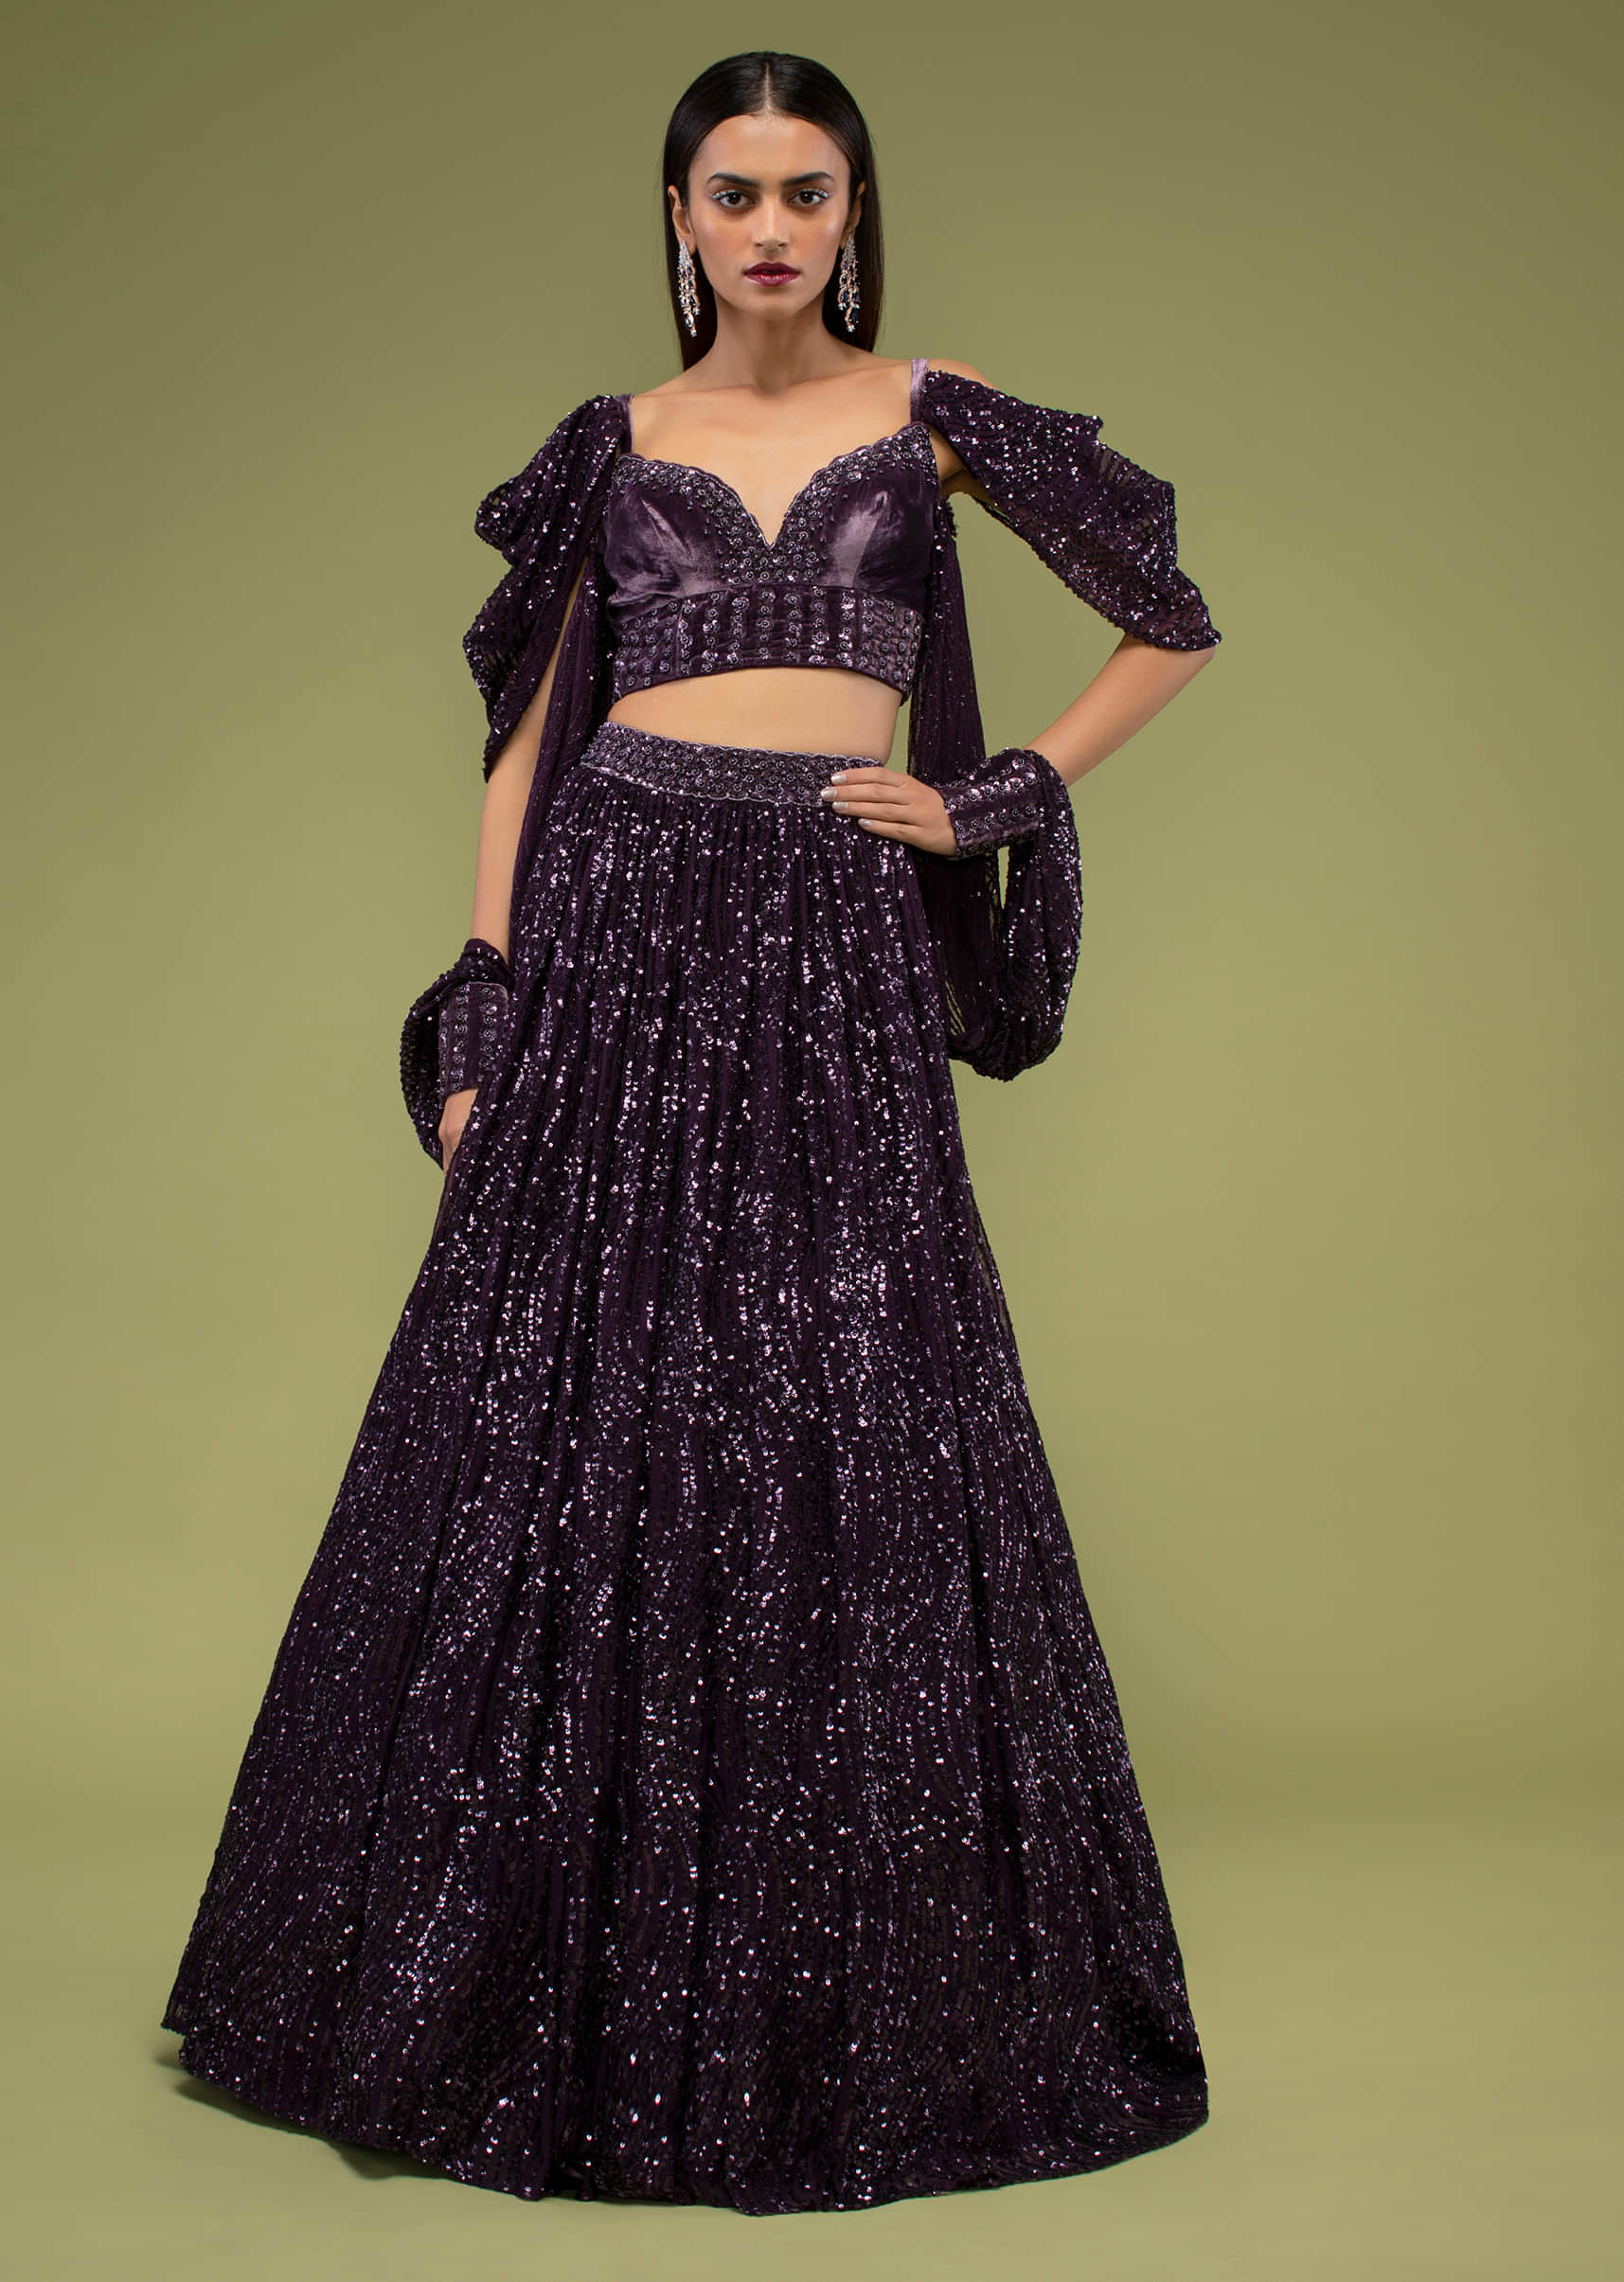 Plum Violet Lehenga And Crop Top In Velvet, Paired With A Cape  Crafted Iin Net With Cuffs At The Border